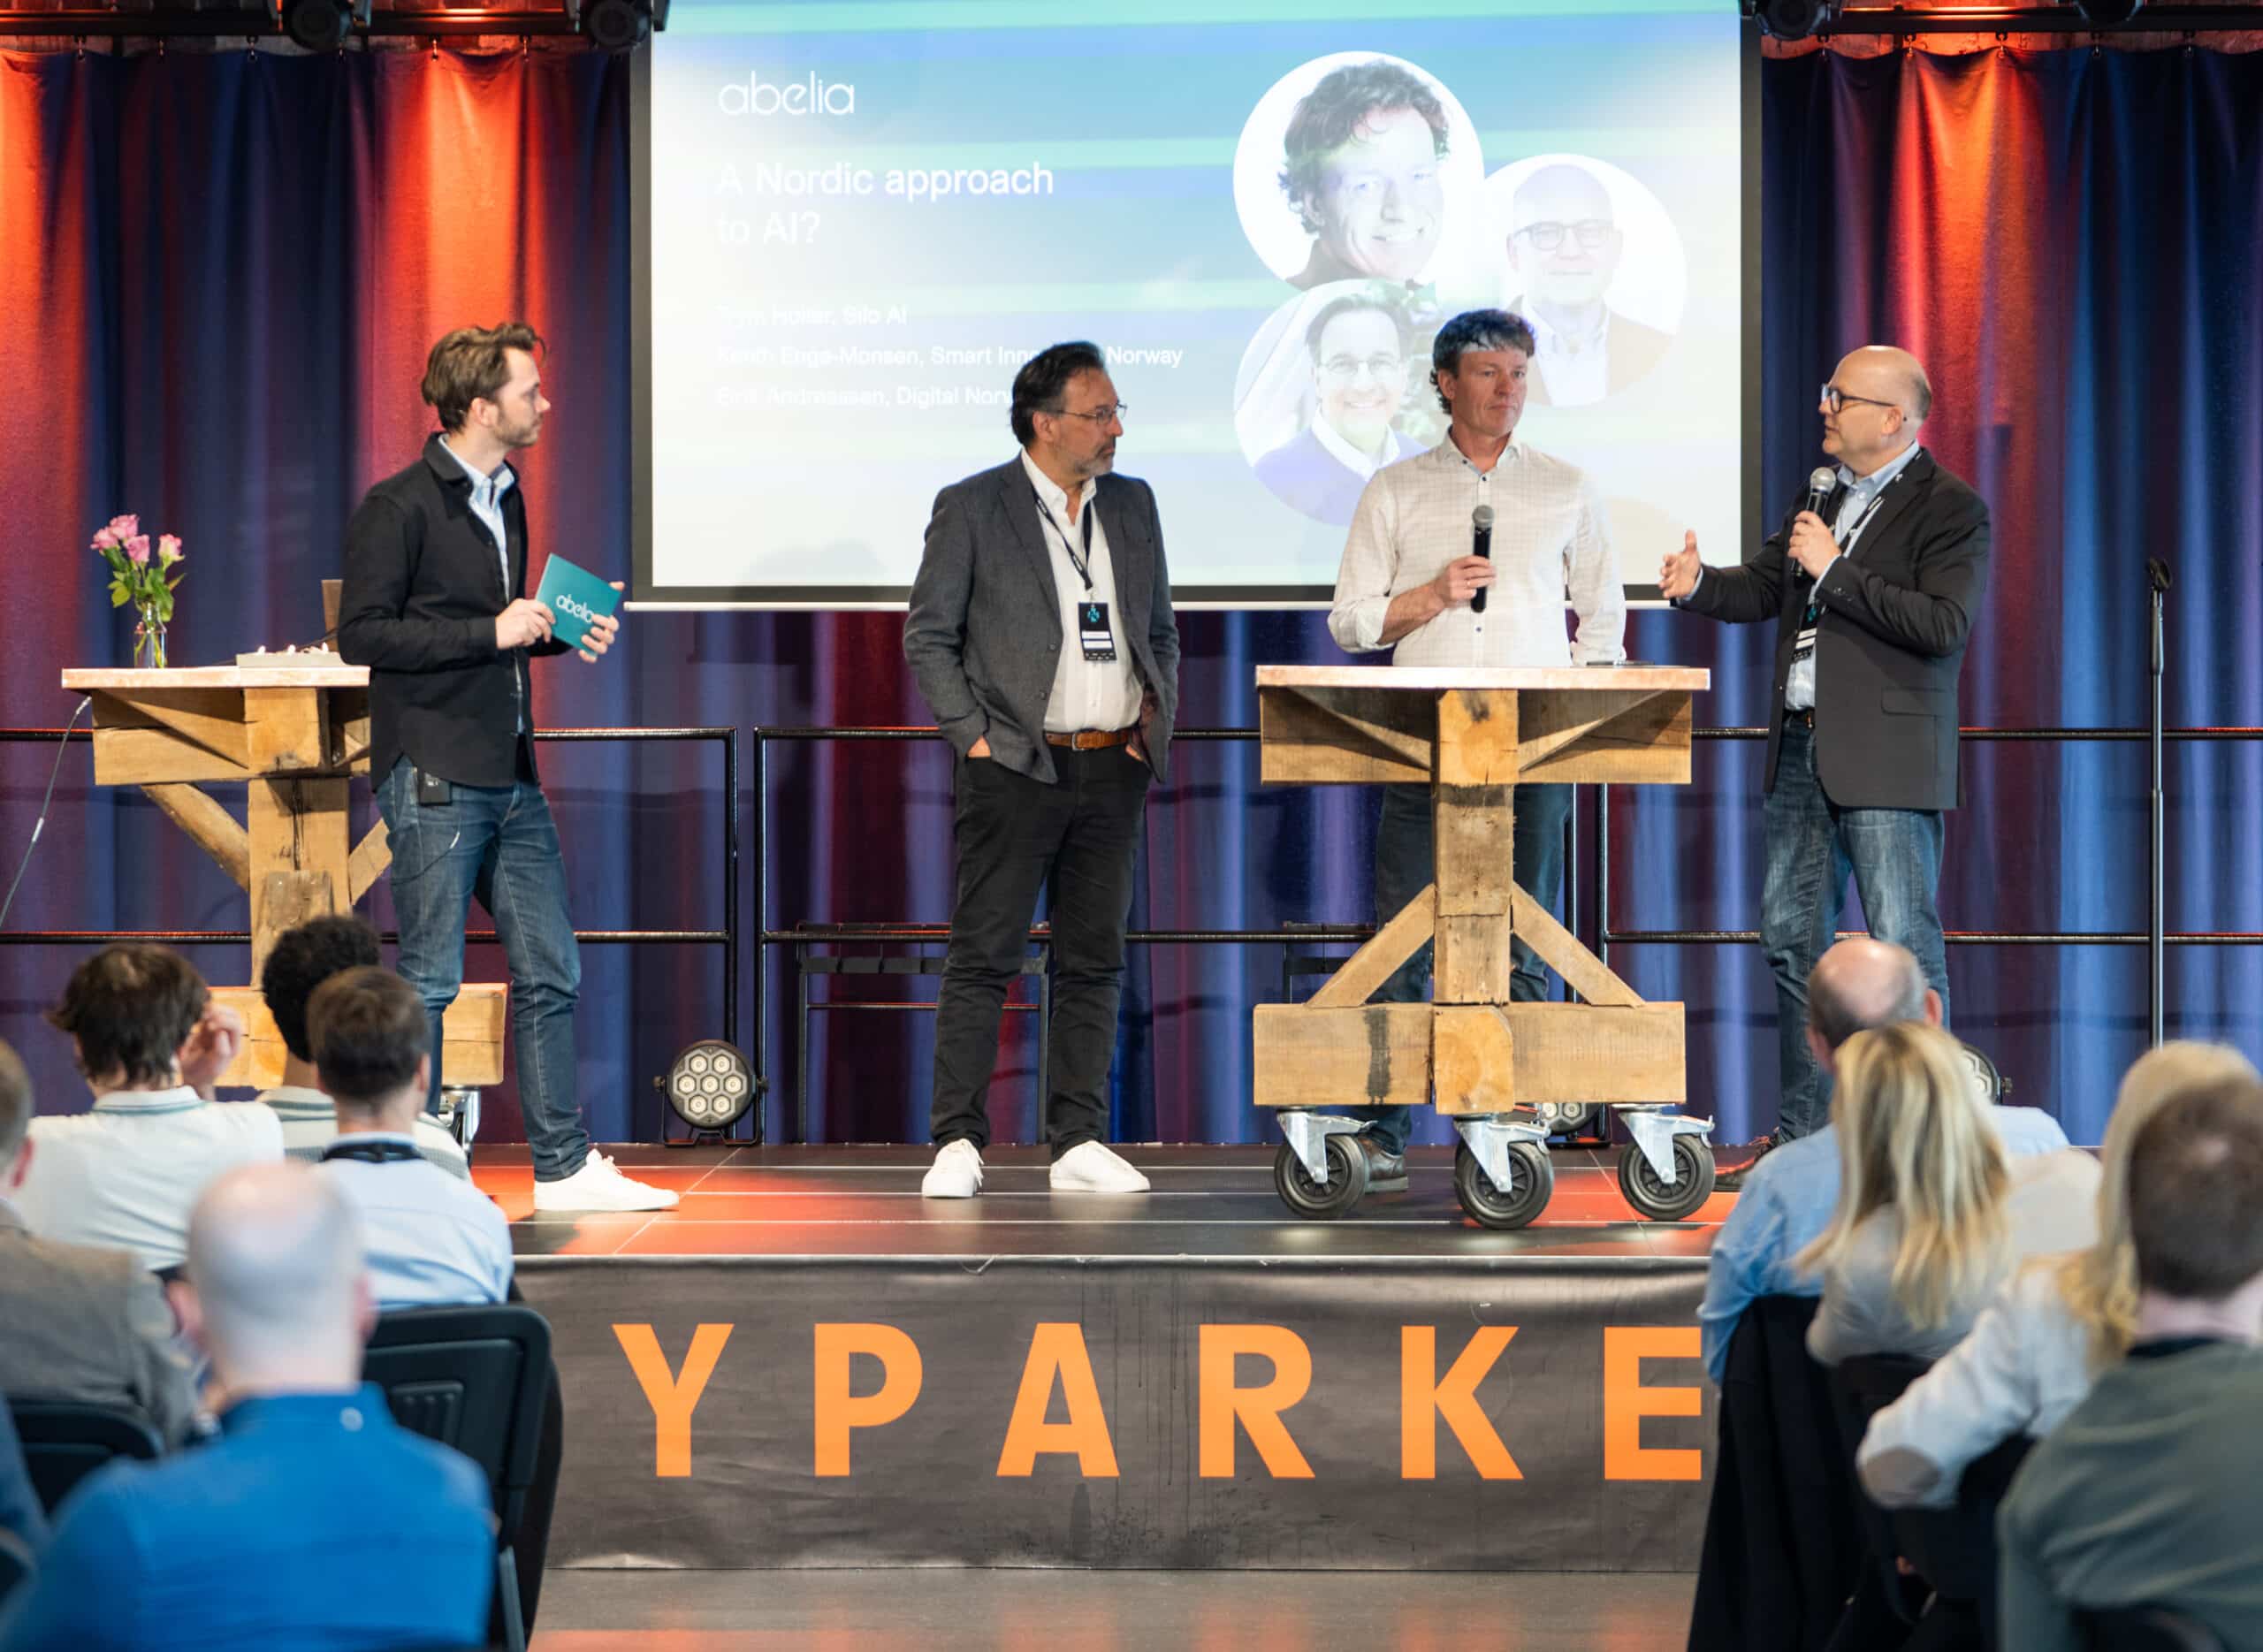 Jo Roald (left) from Abelia hosted the morning session at Day 2. Here with Eirik Andreassen from Digital Norway, Trym Holter from Silo AI and Kenth Engø-Monsen from Smart Innovation Norway. PHOTO: Stein Johnsen, ContentVideo